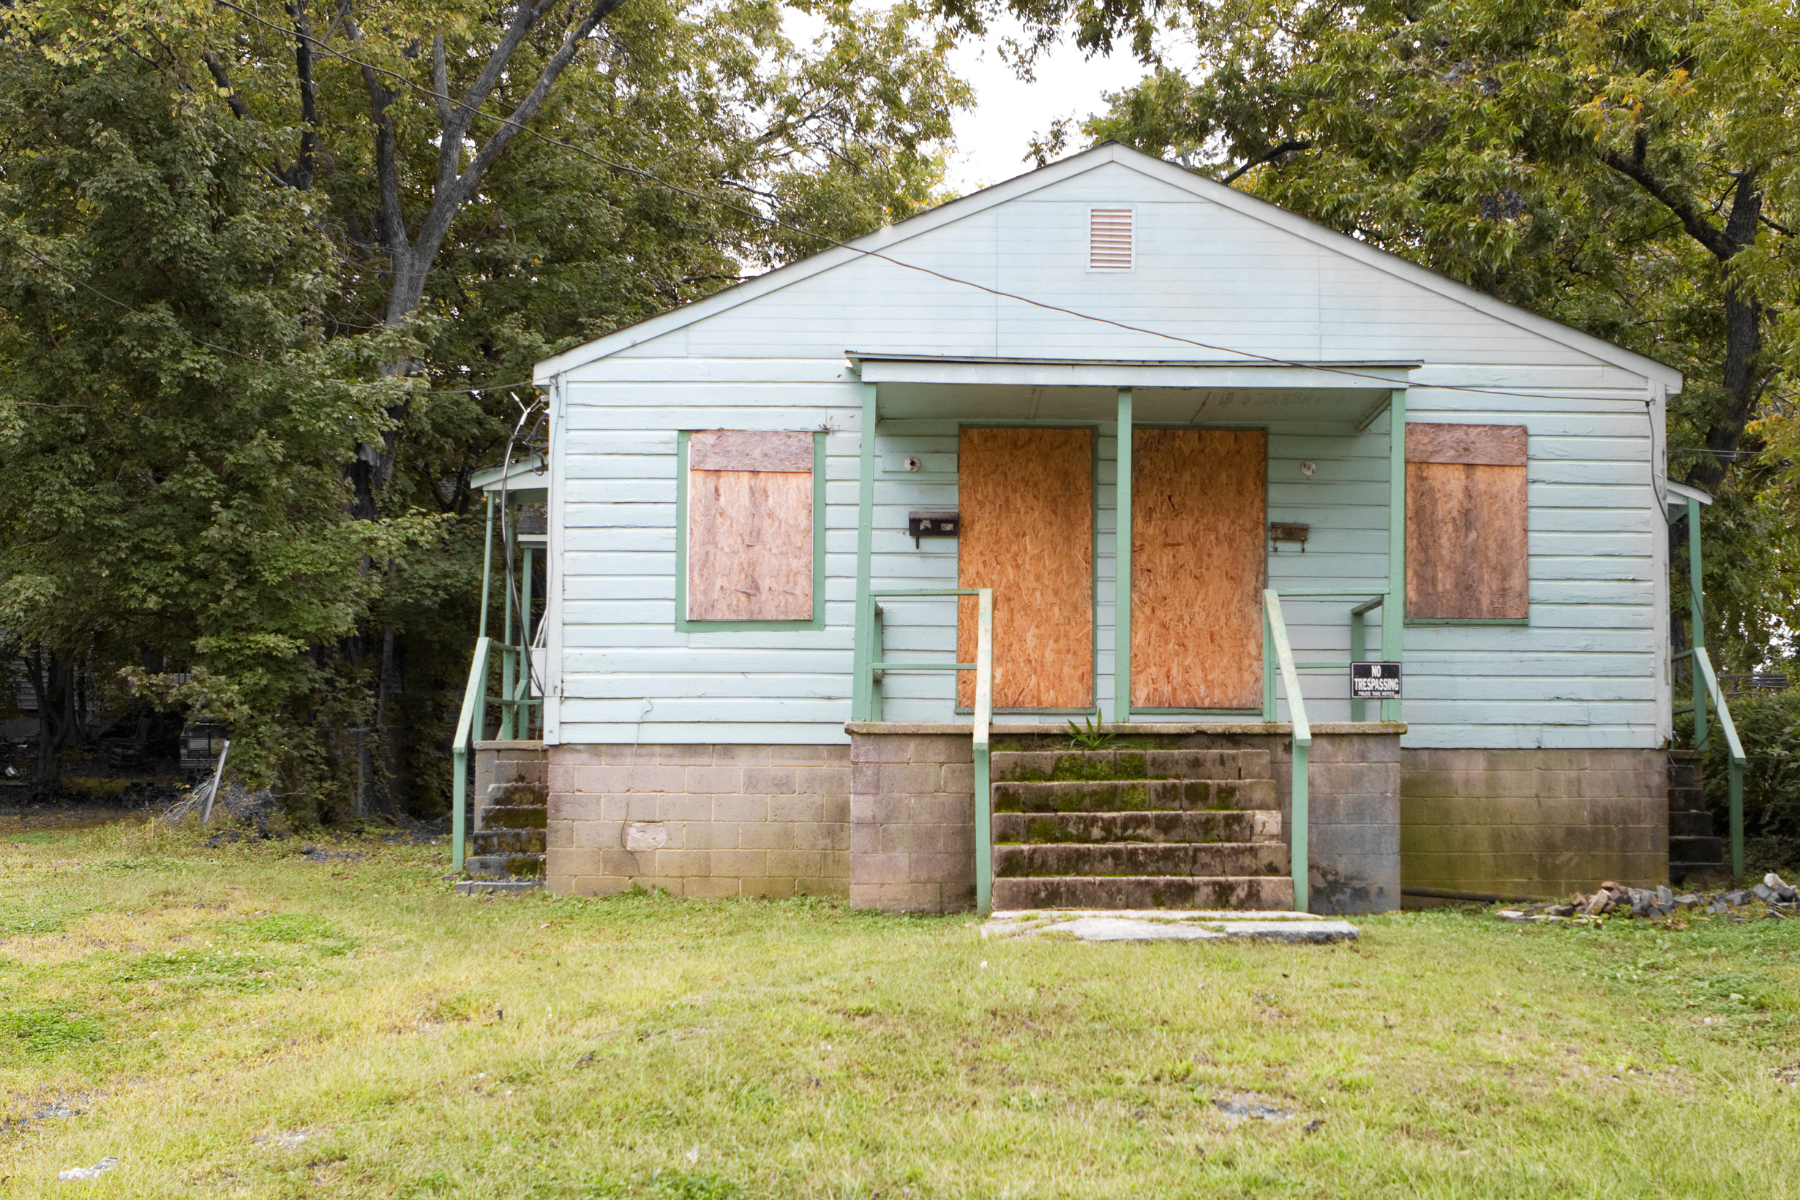 Why Are Foreclosures A Popular Investment?